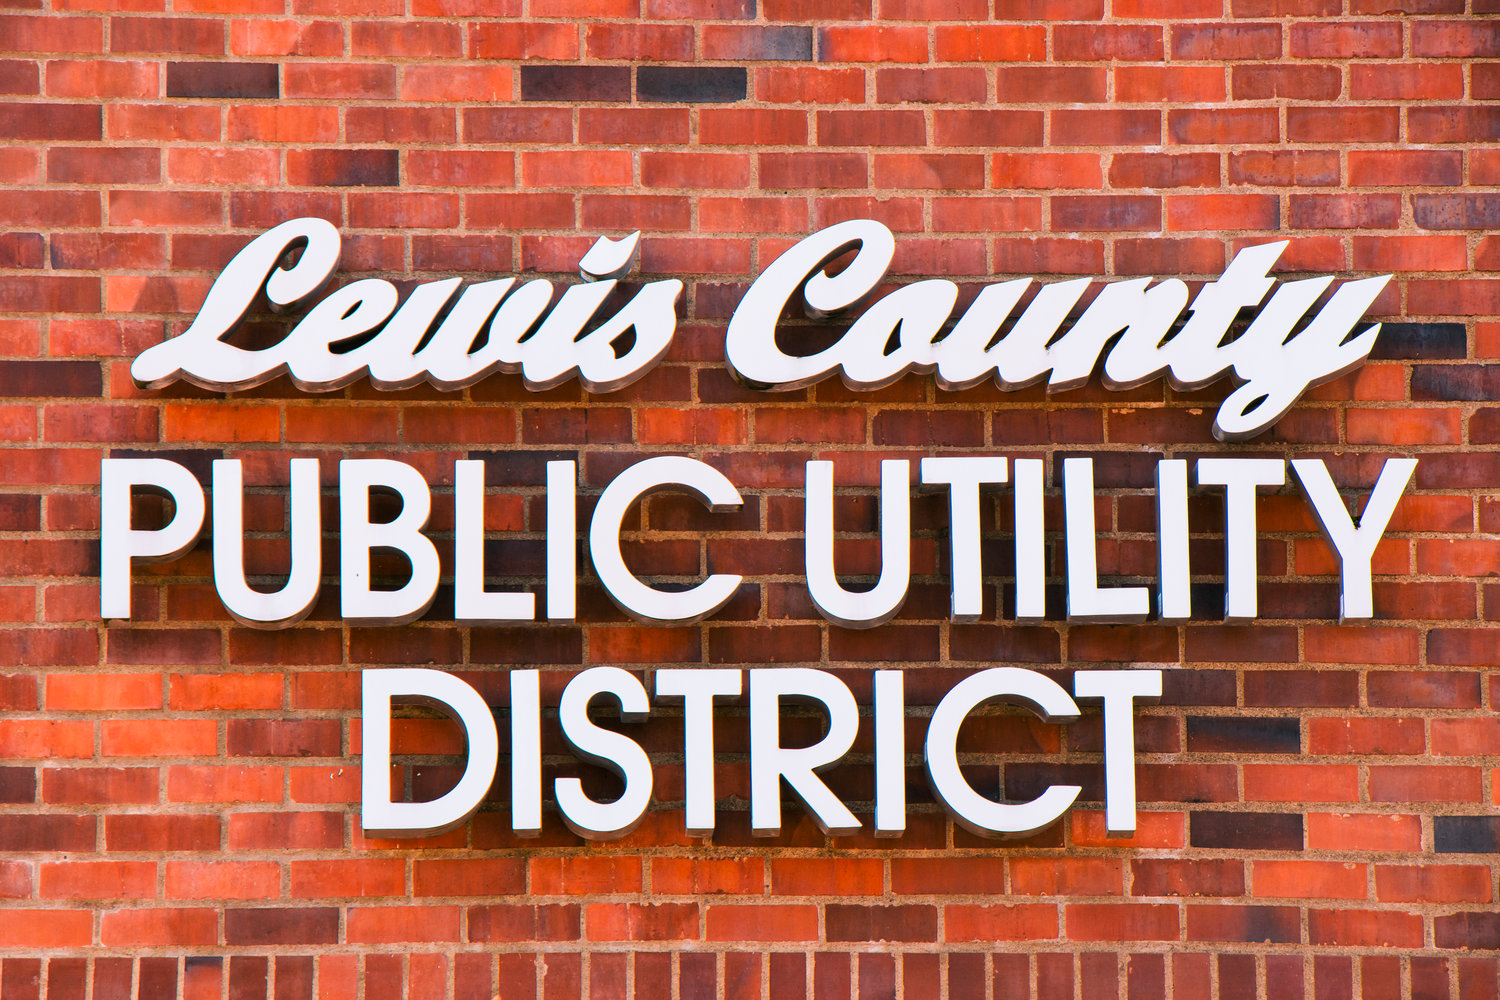 The Lewis County Public Utility District office in Chehalis is located at 321 NW Pacific Ave.